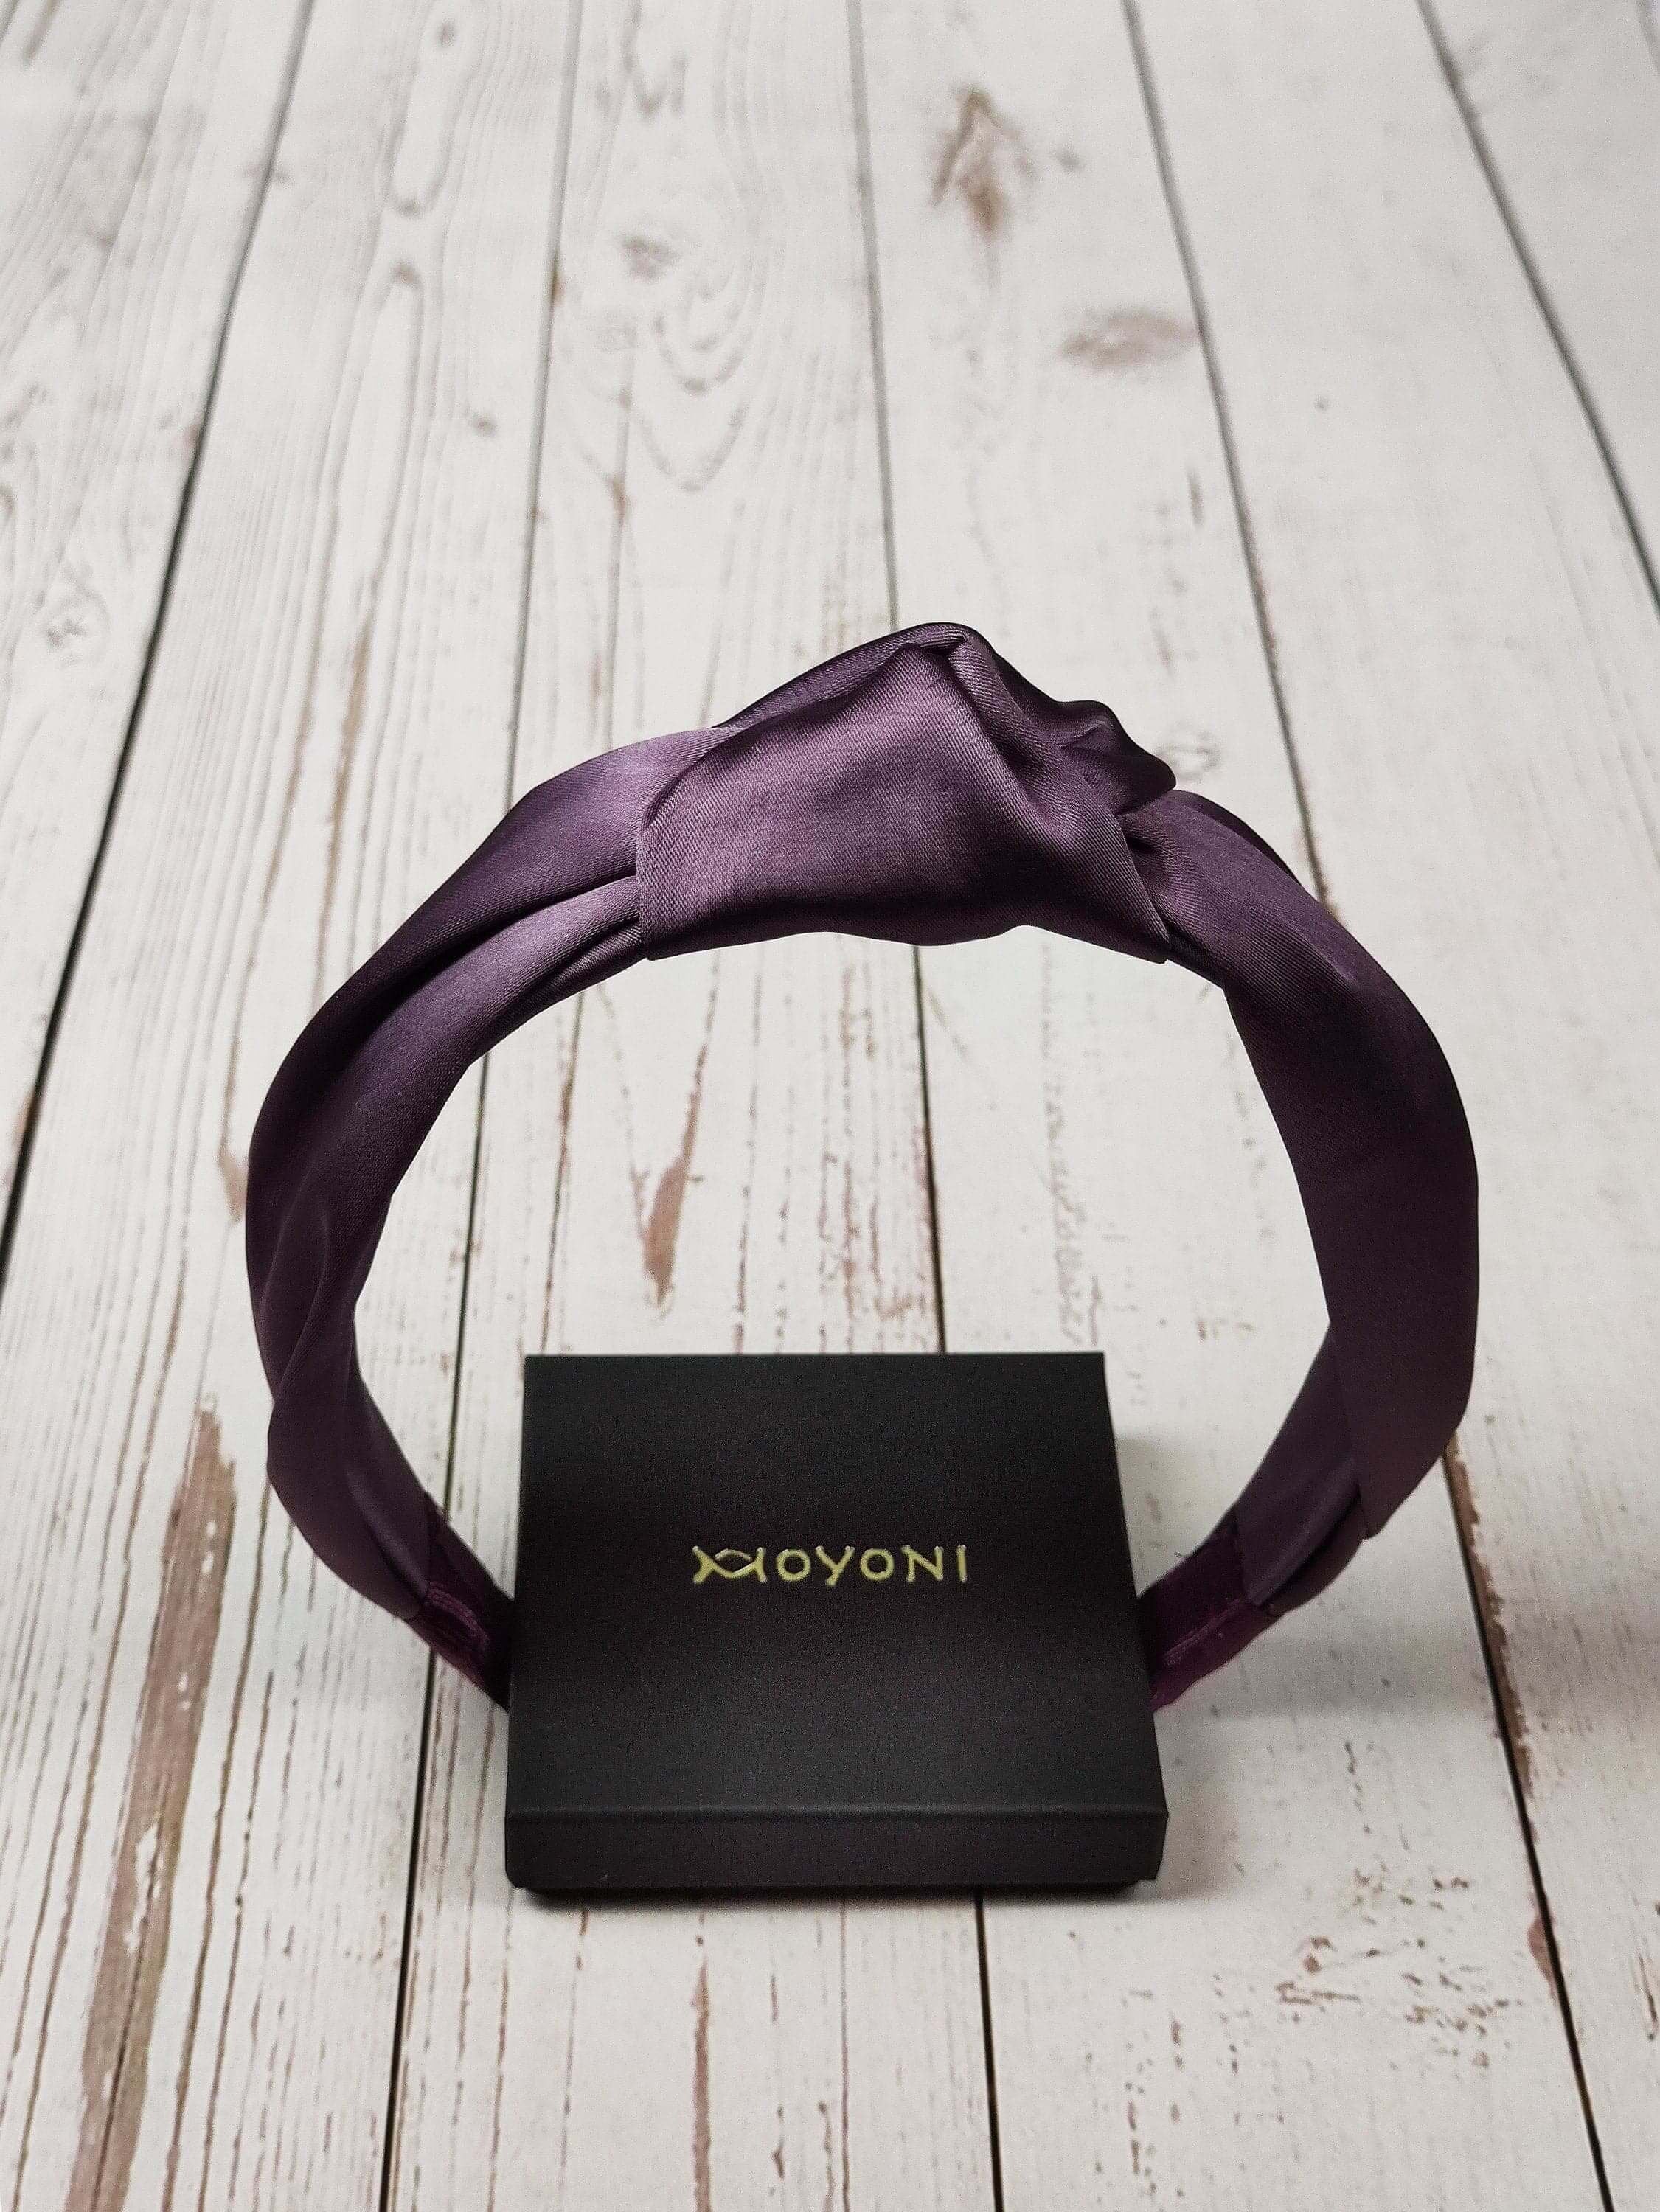 Find the perfect lilac satin headband to flatter your elfin features! This stylish headband is made from soft and luxurious satin fabric and will keep your hair looking neat and tidy all day long.